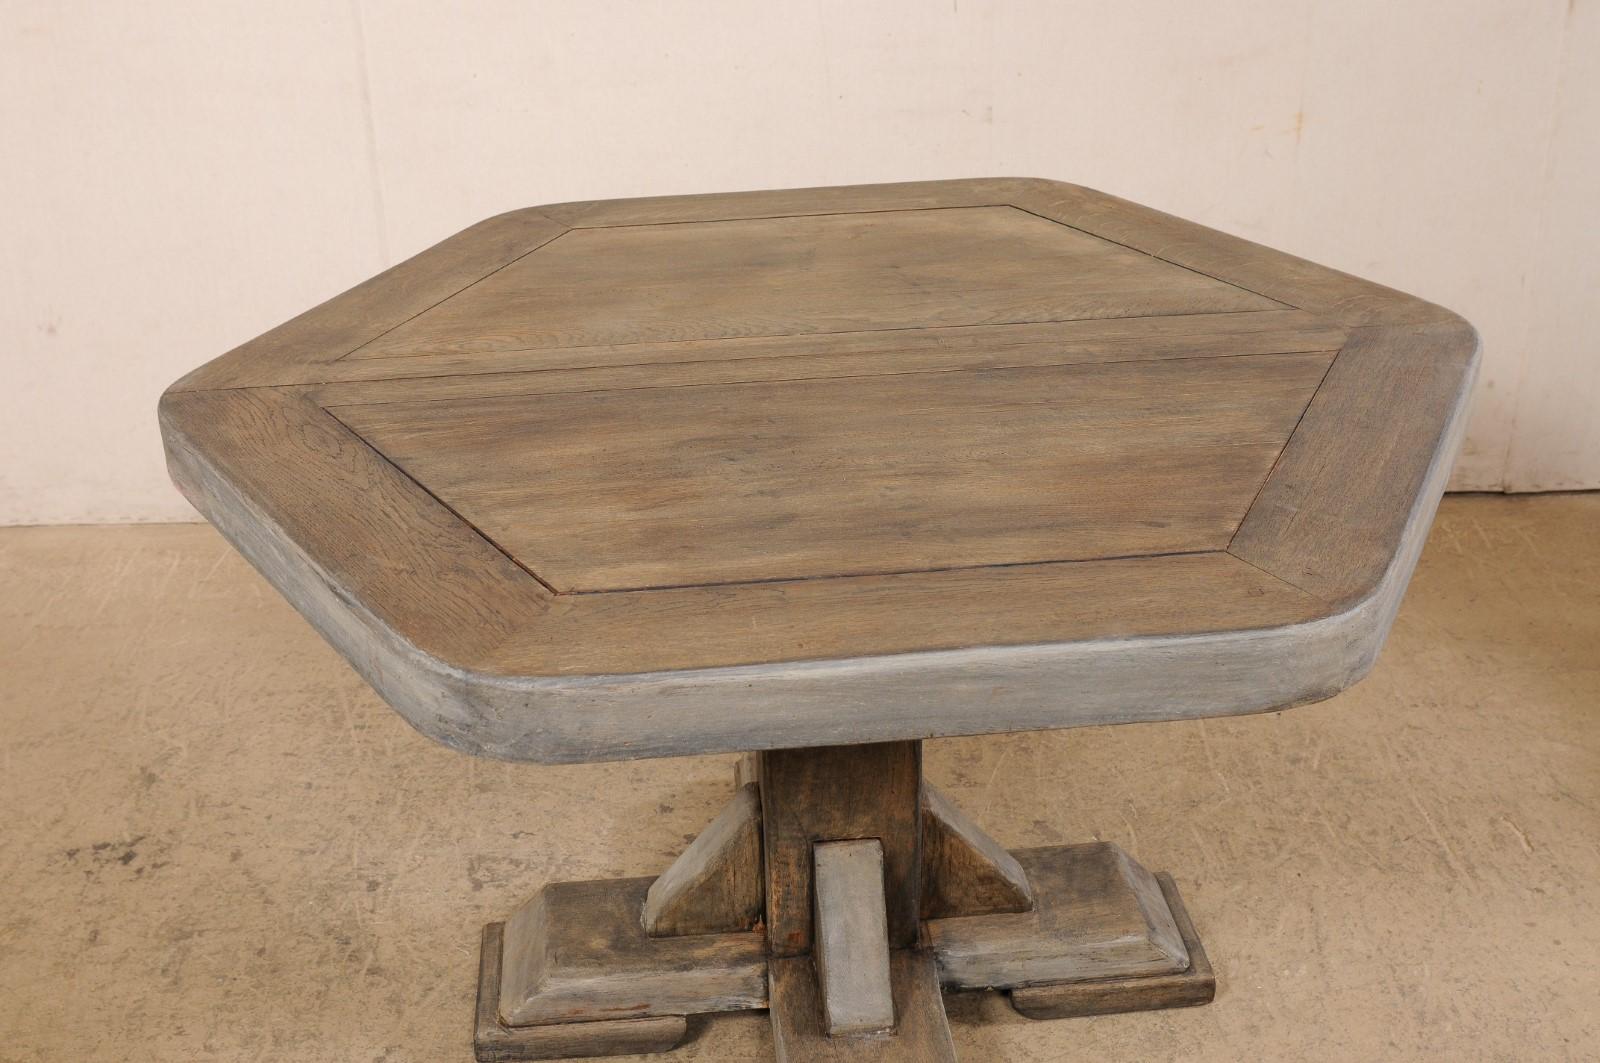 20th Century European Hexagon-Shaped Wooden Pedestal Table, Mid 20th century For Sale